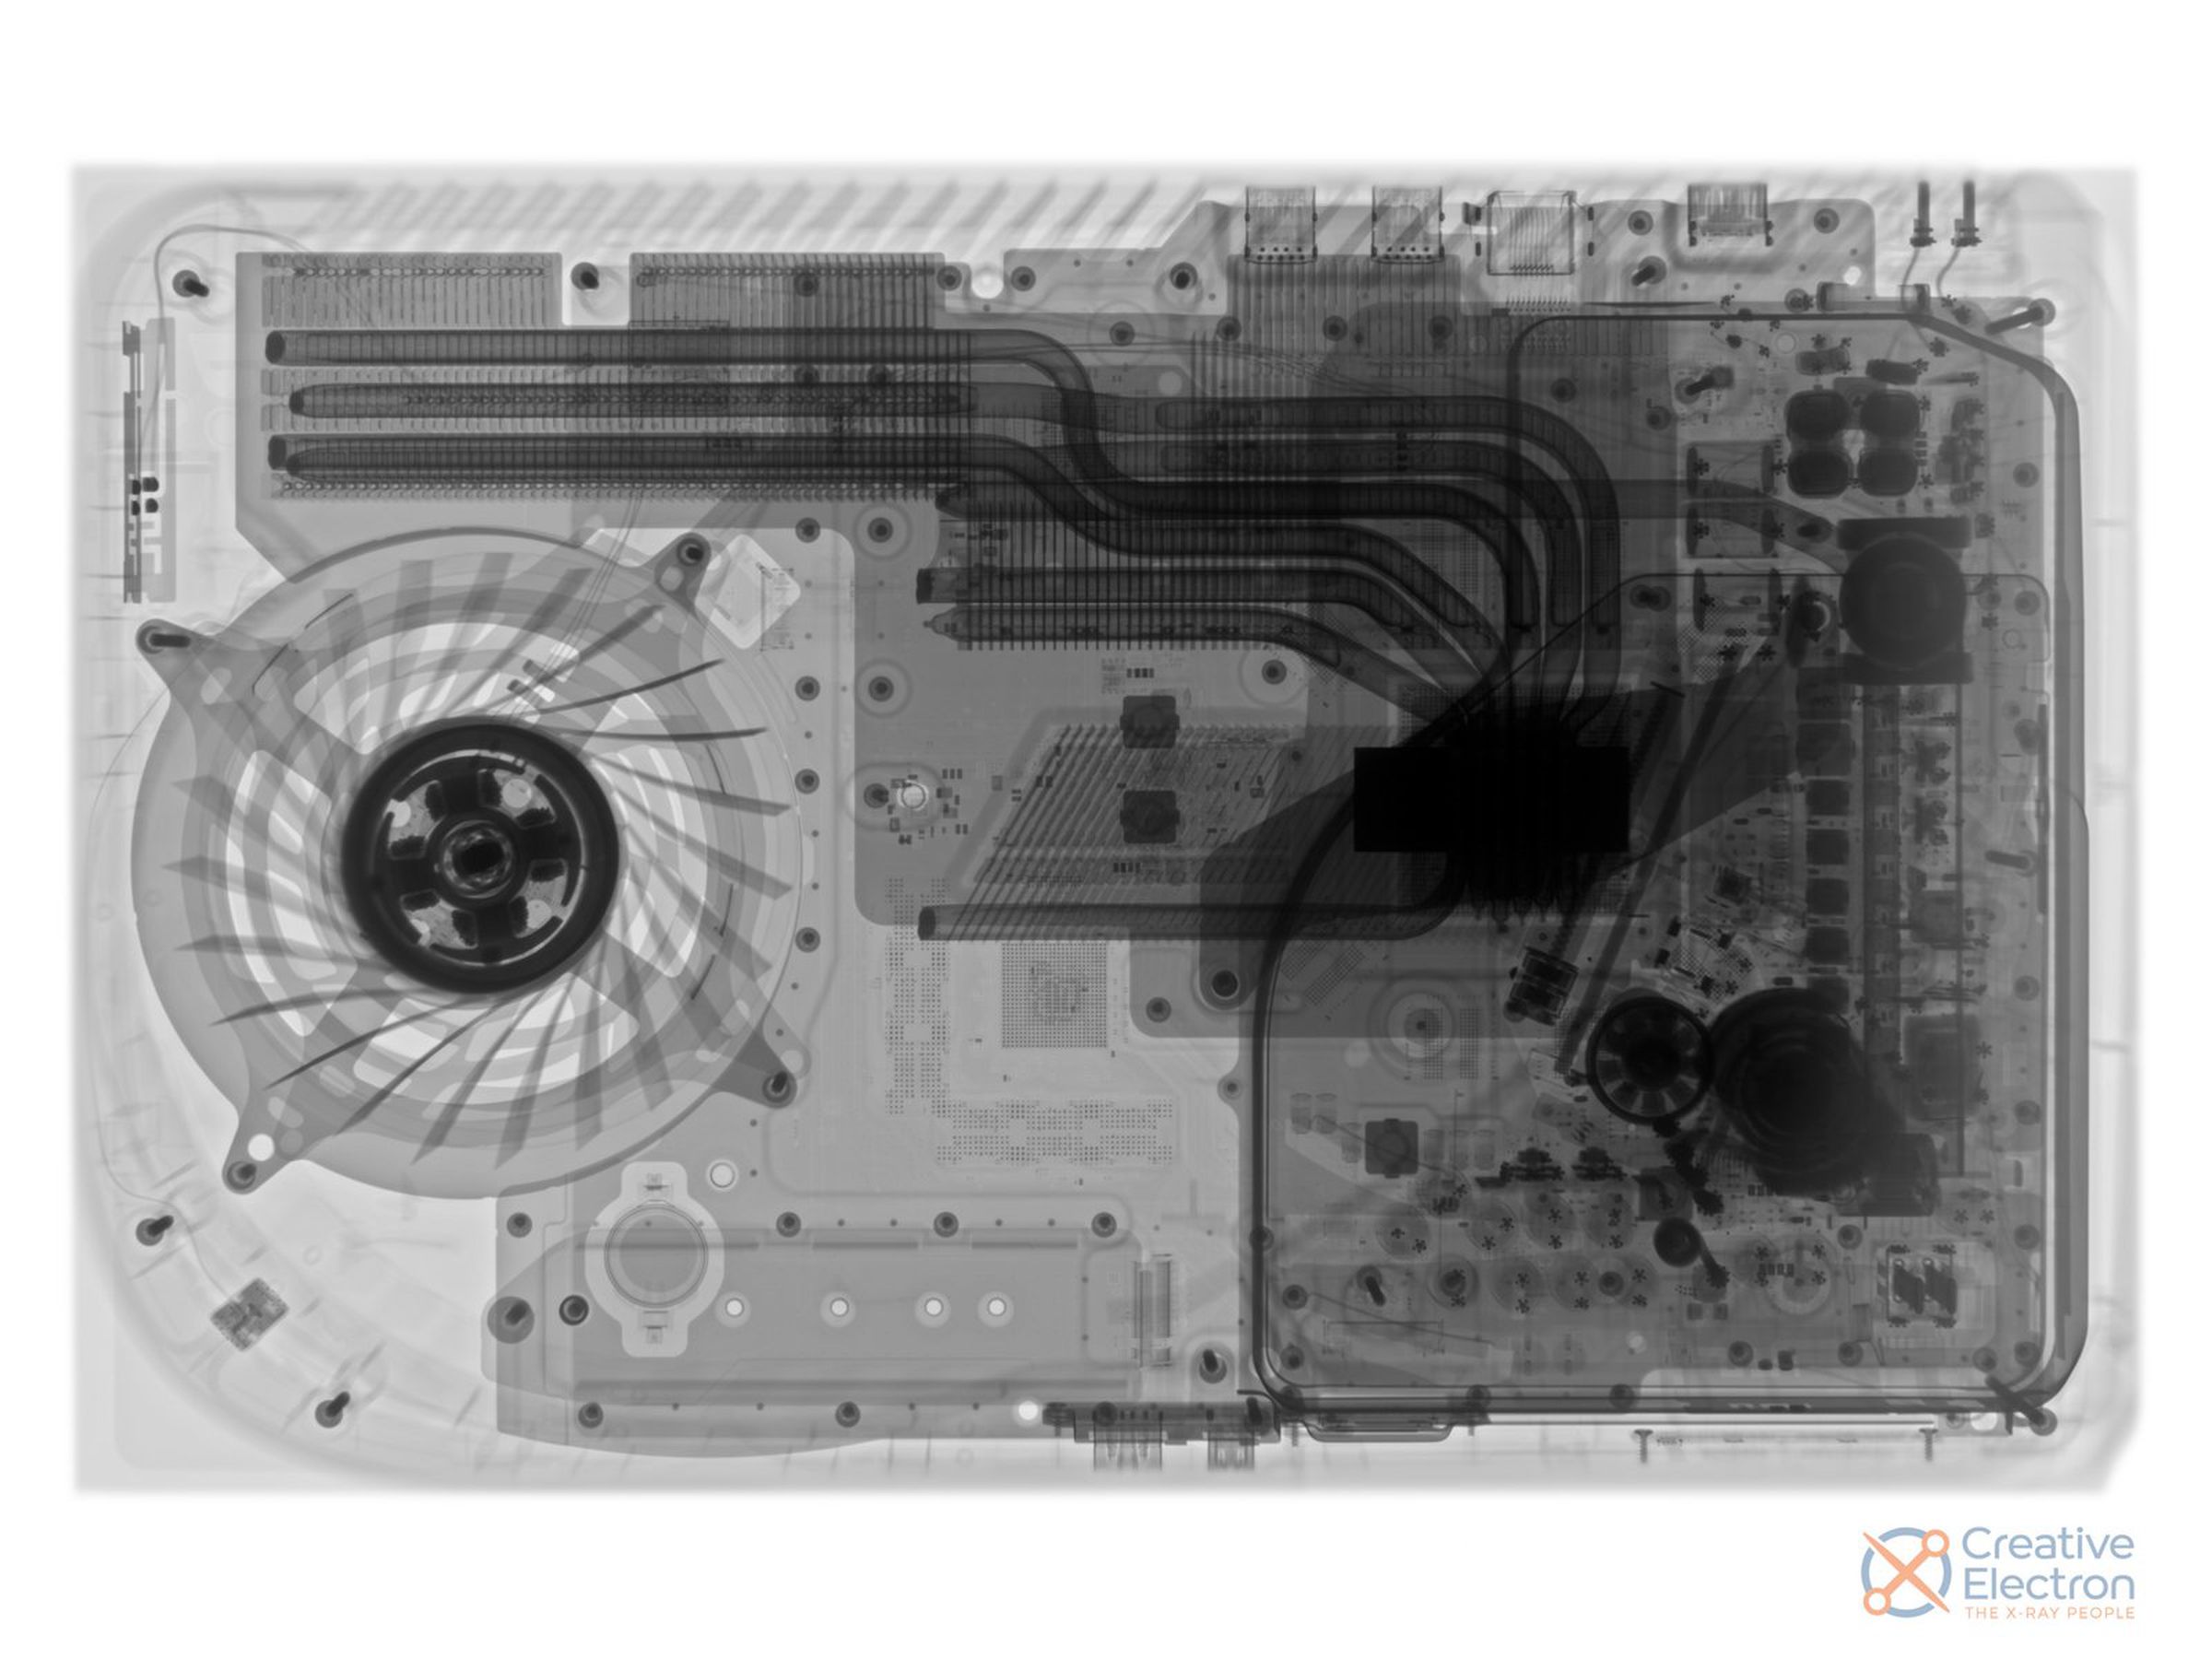 An x-ray image of the Playstation 5